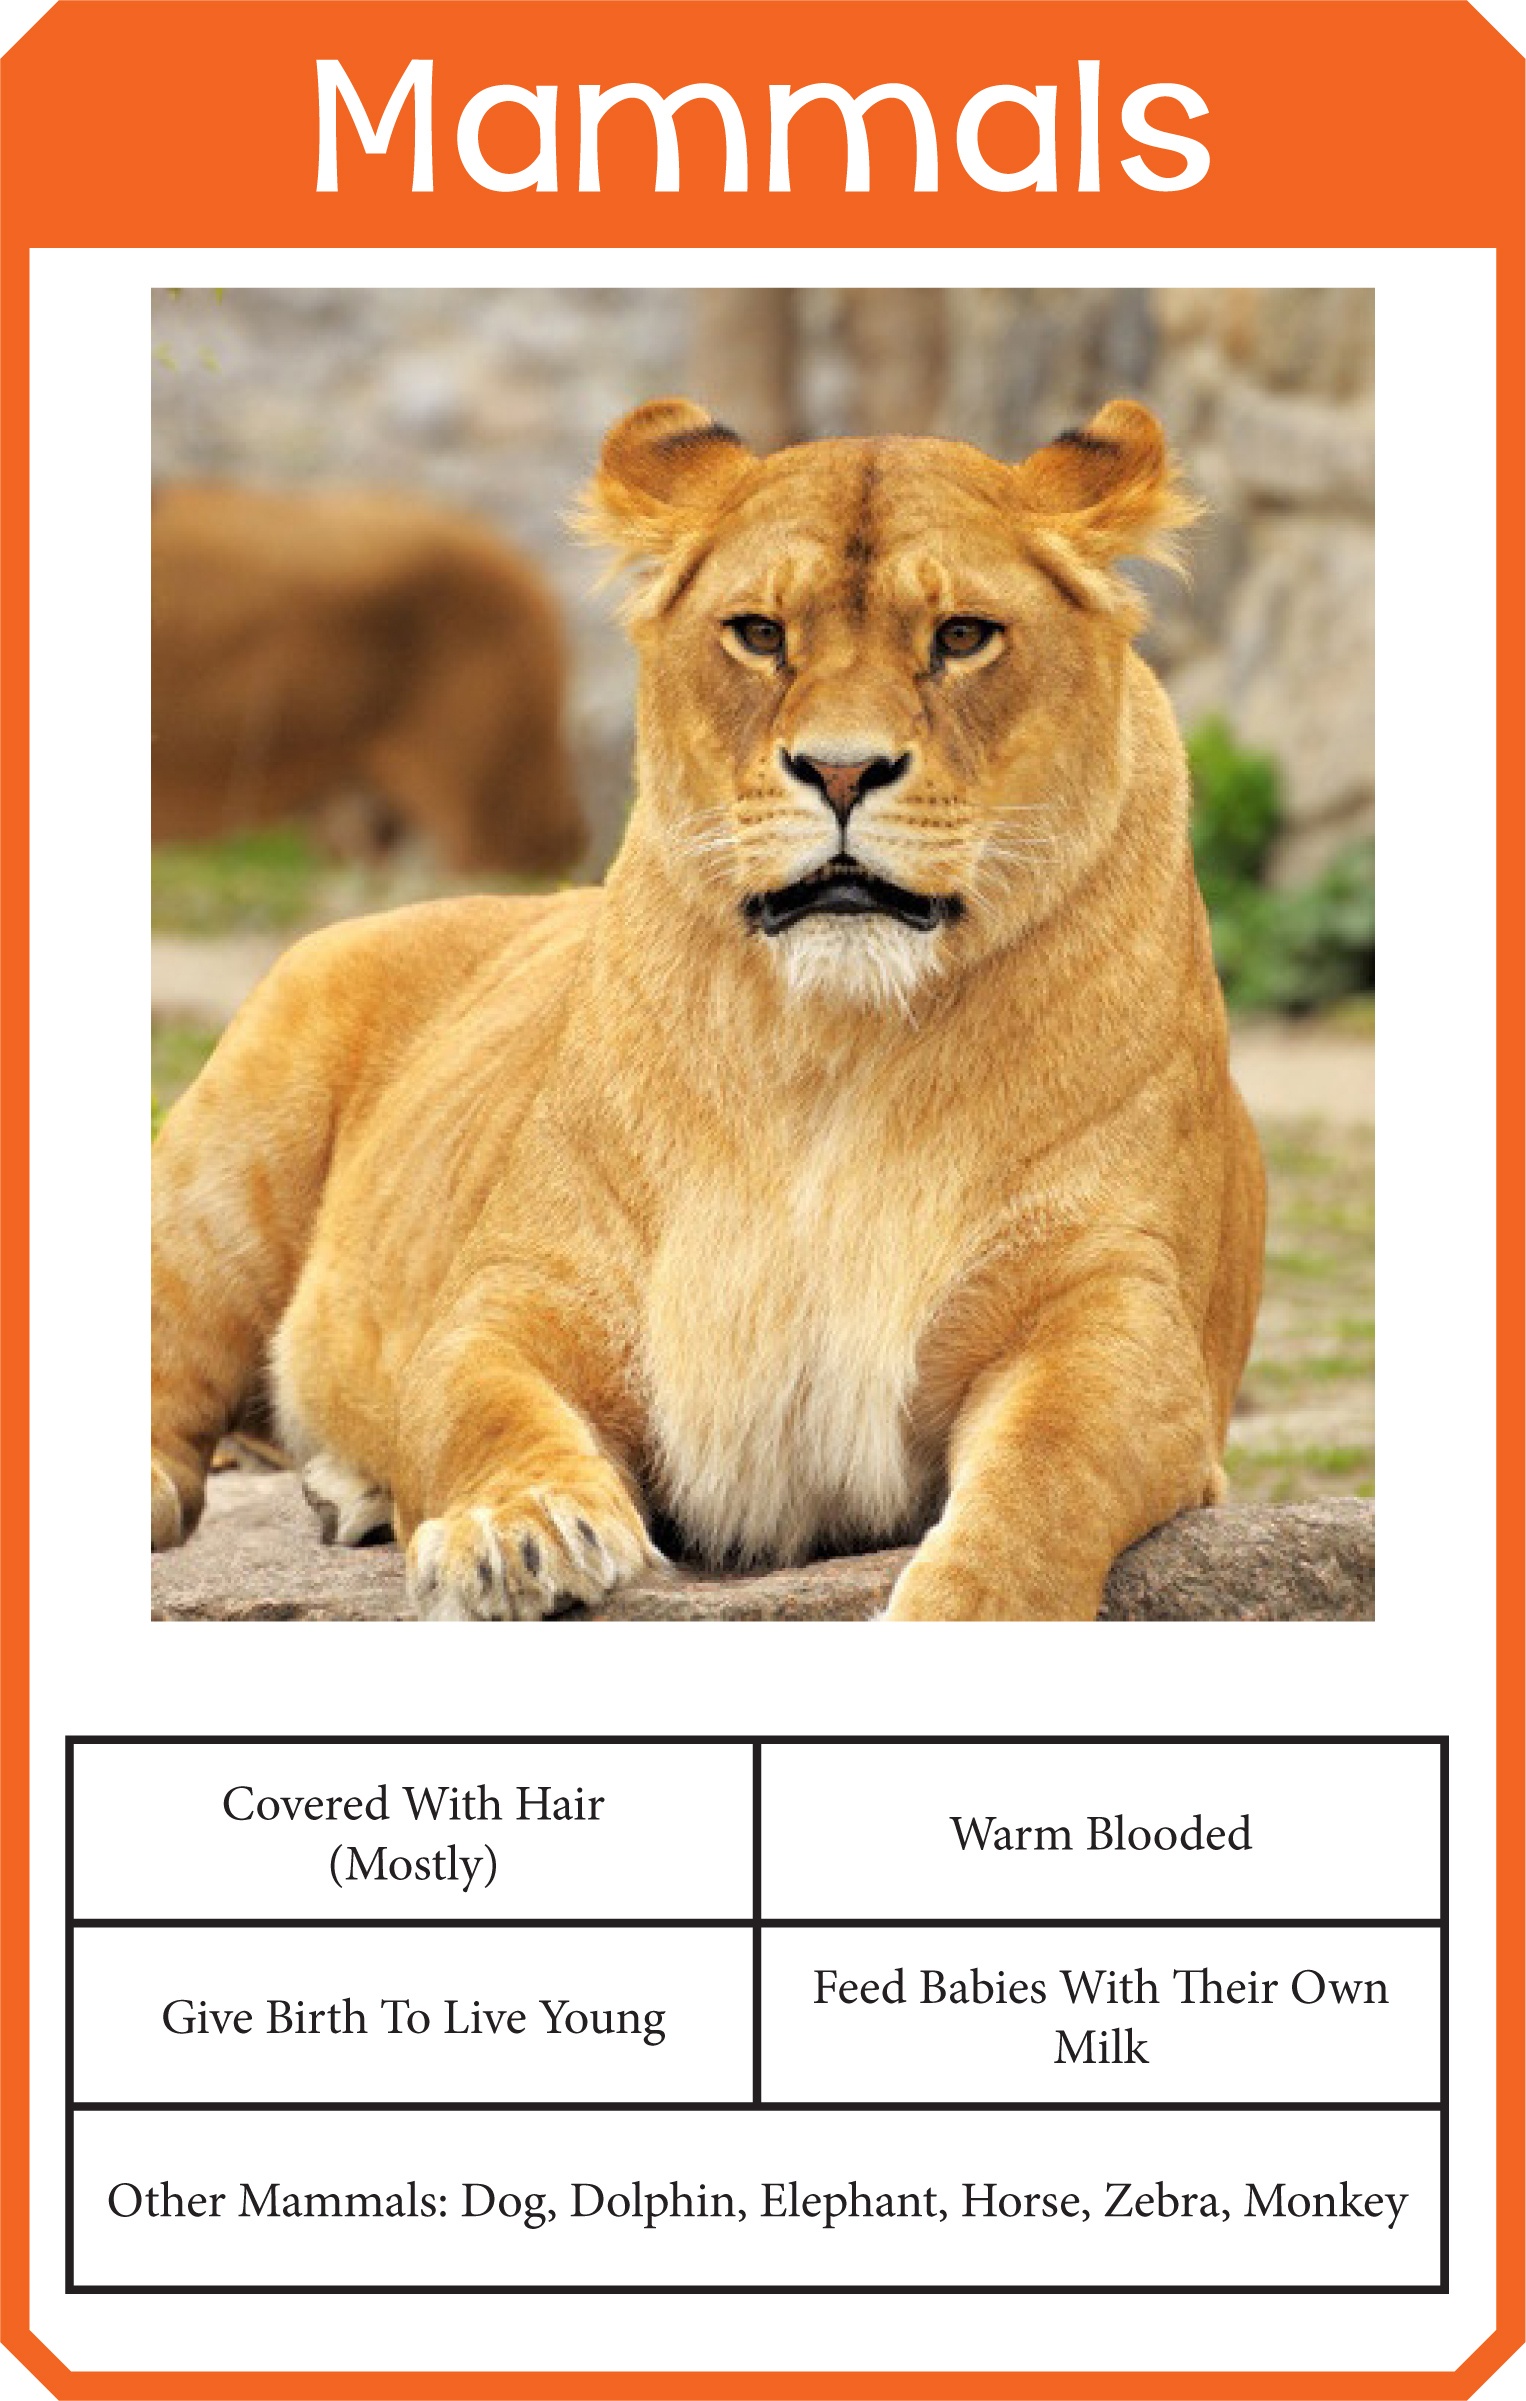 Animal Classification Cards » One Beautiful Home - Free Printable Animal Classification Cards